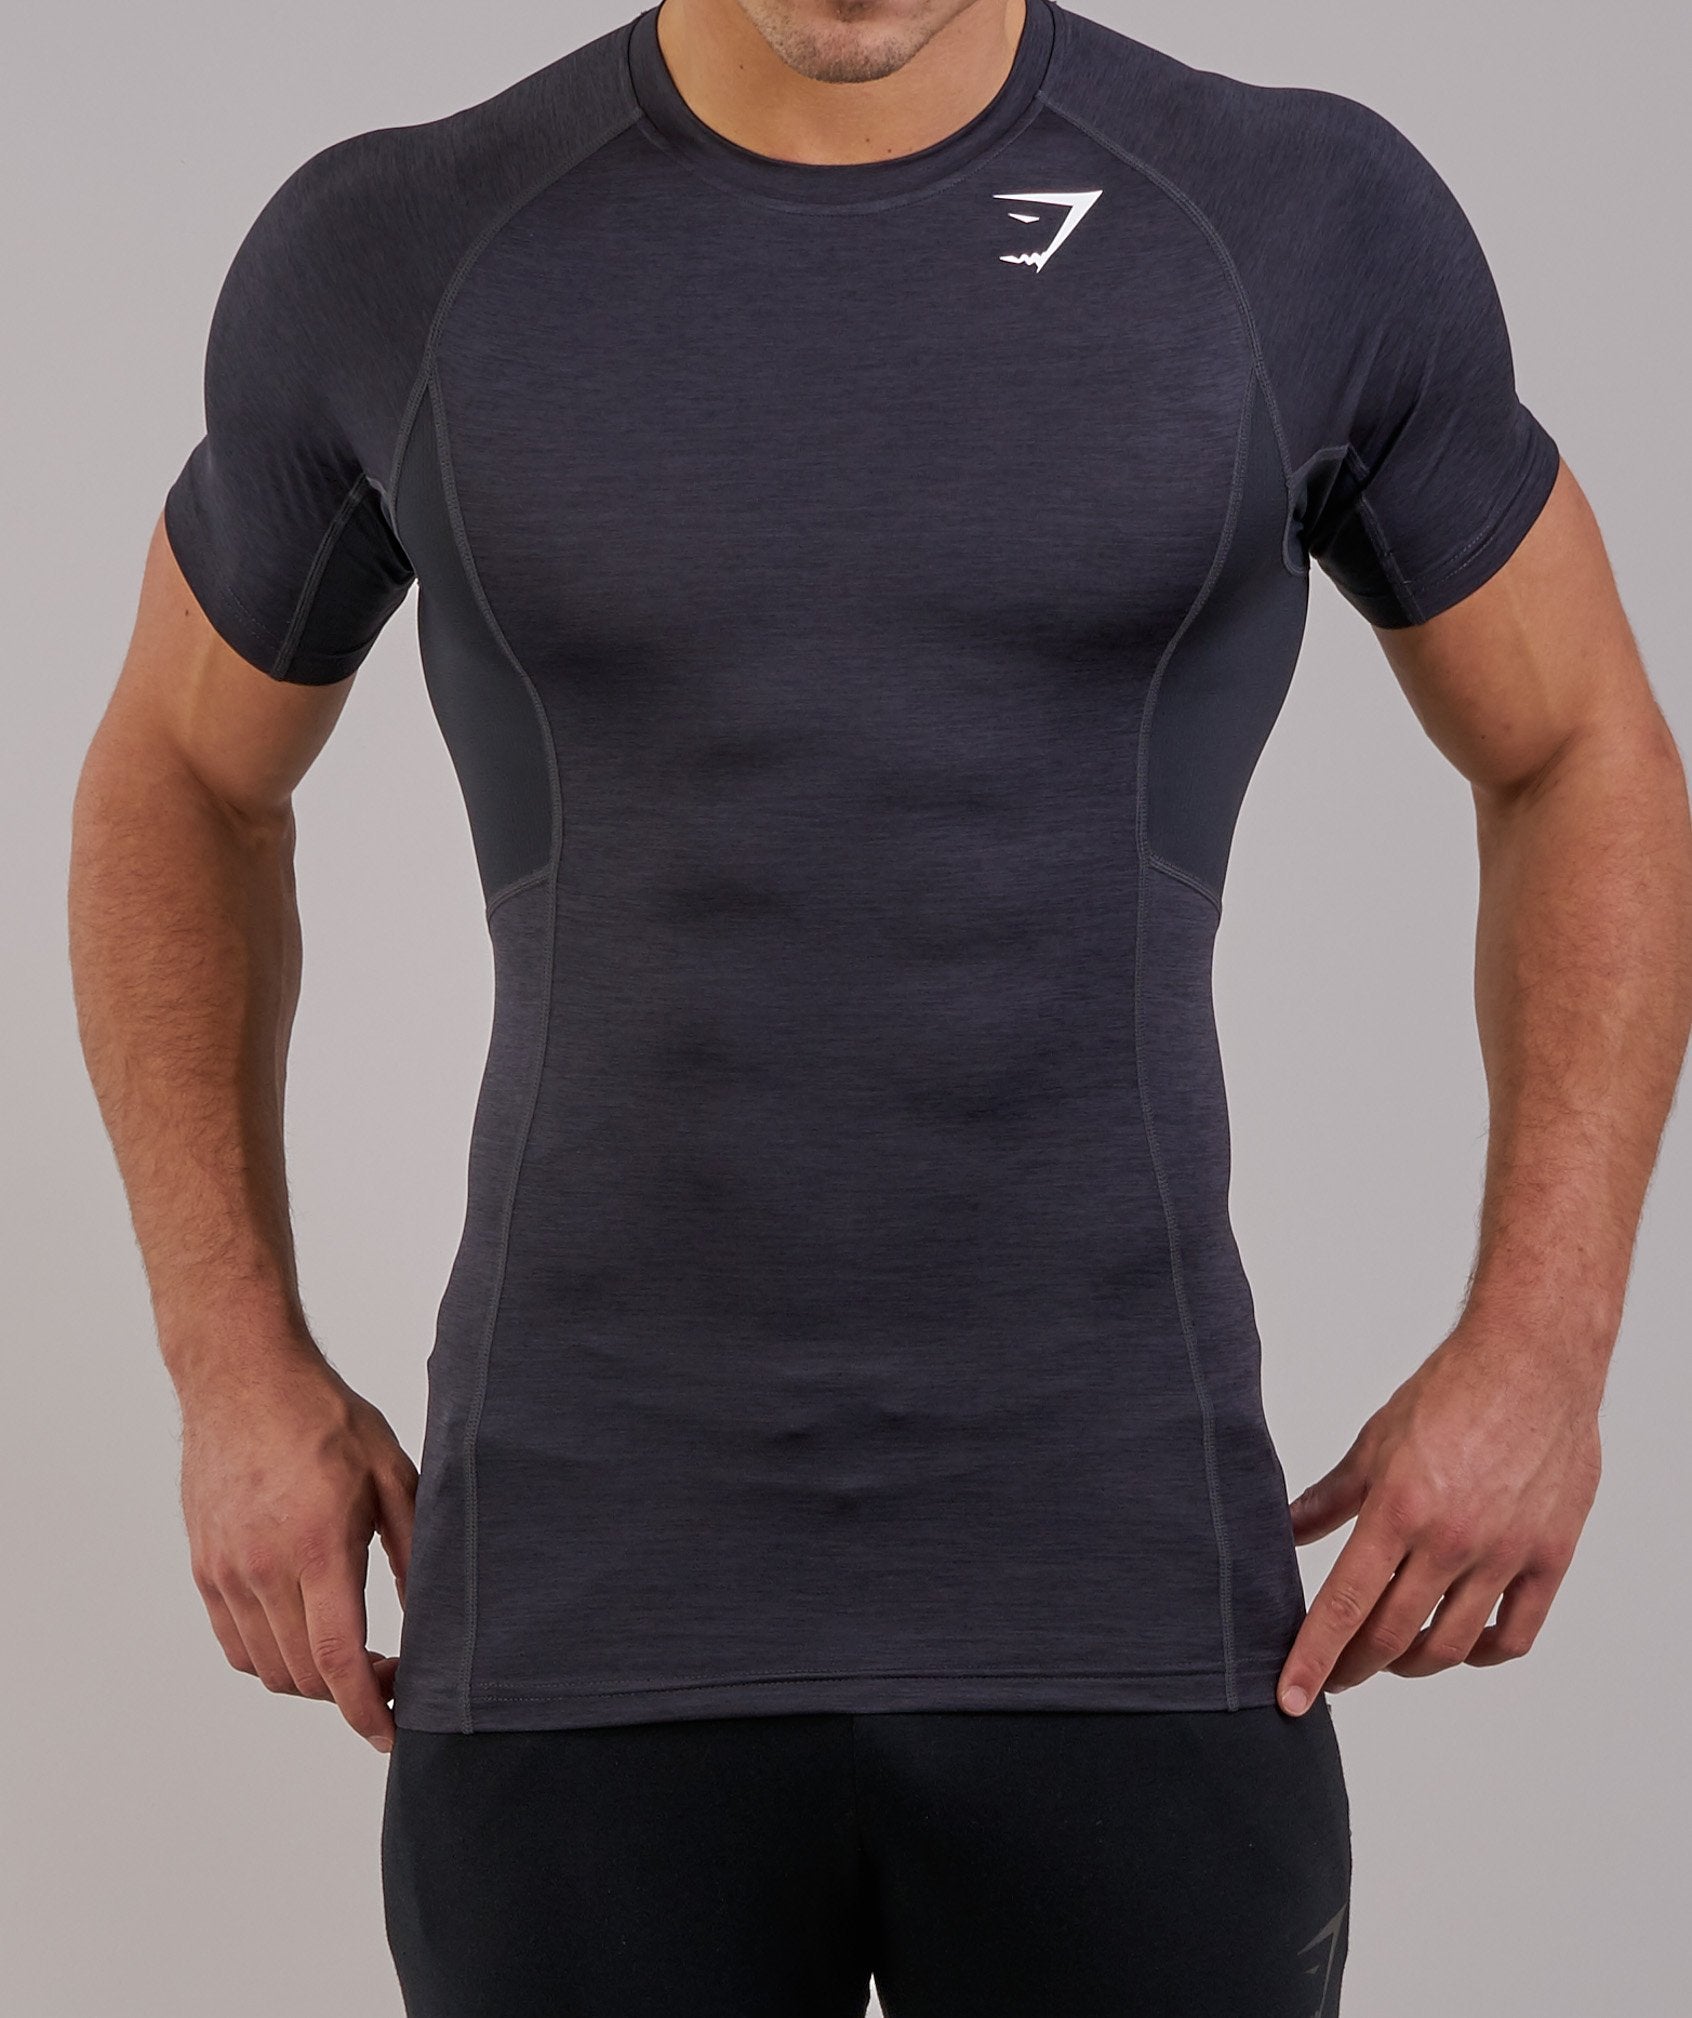 Element Baselayer Short Sleeve Top in Black Marl - view 3